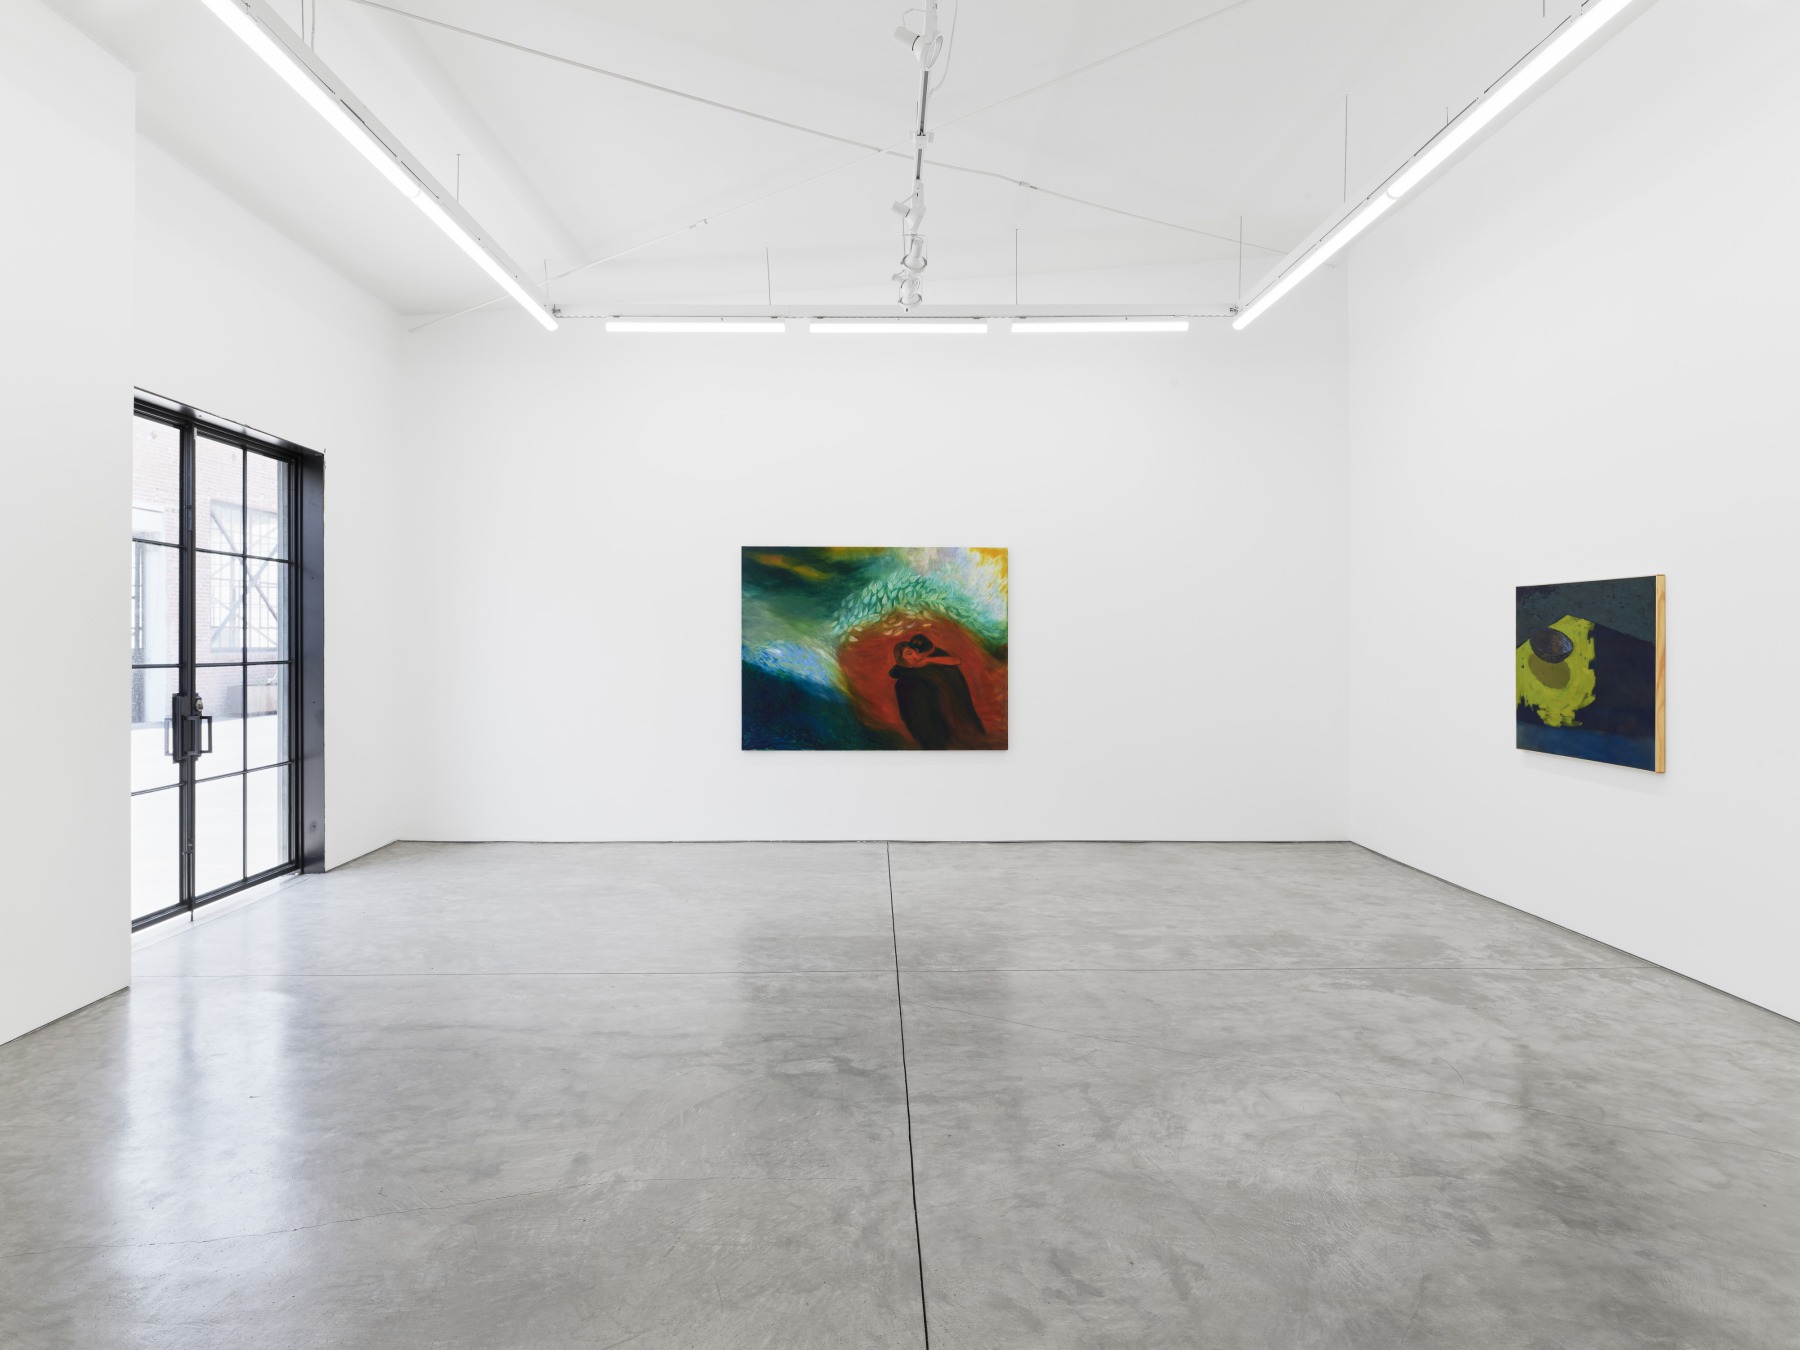 And Now at Night, installation view, 2022